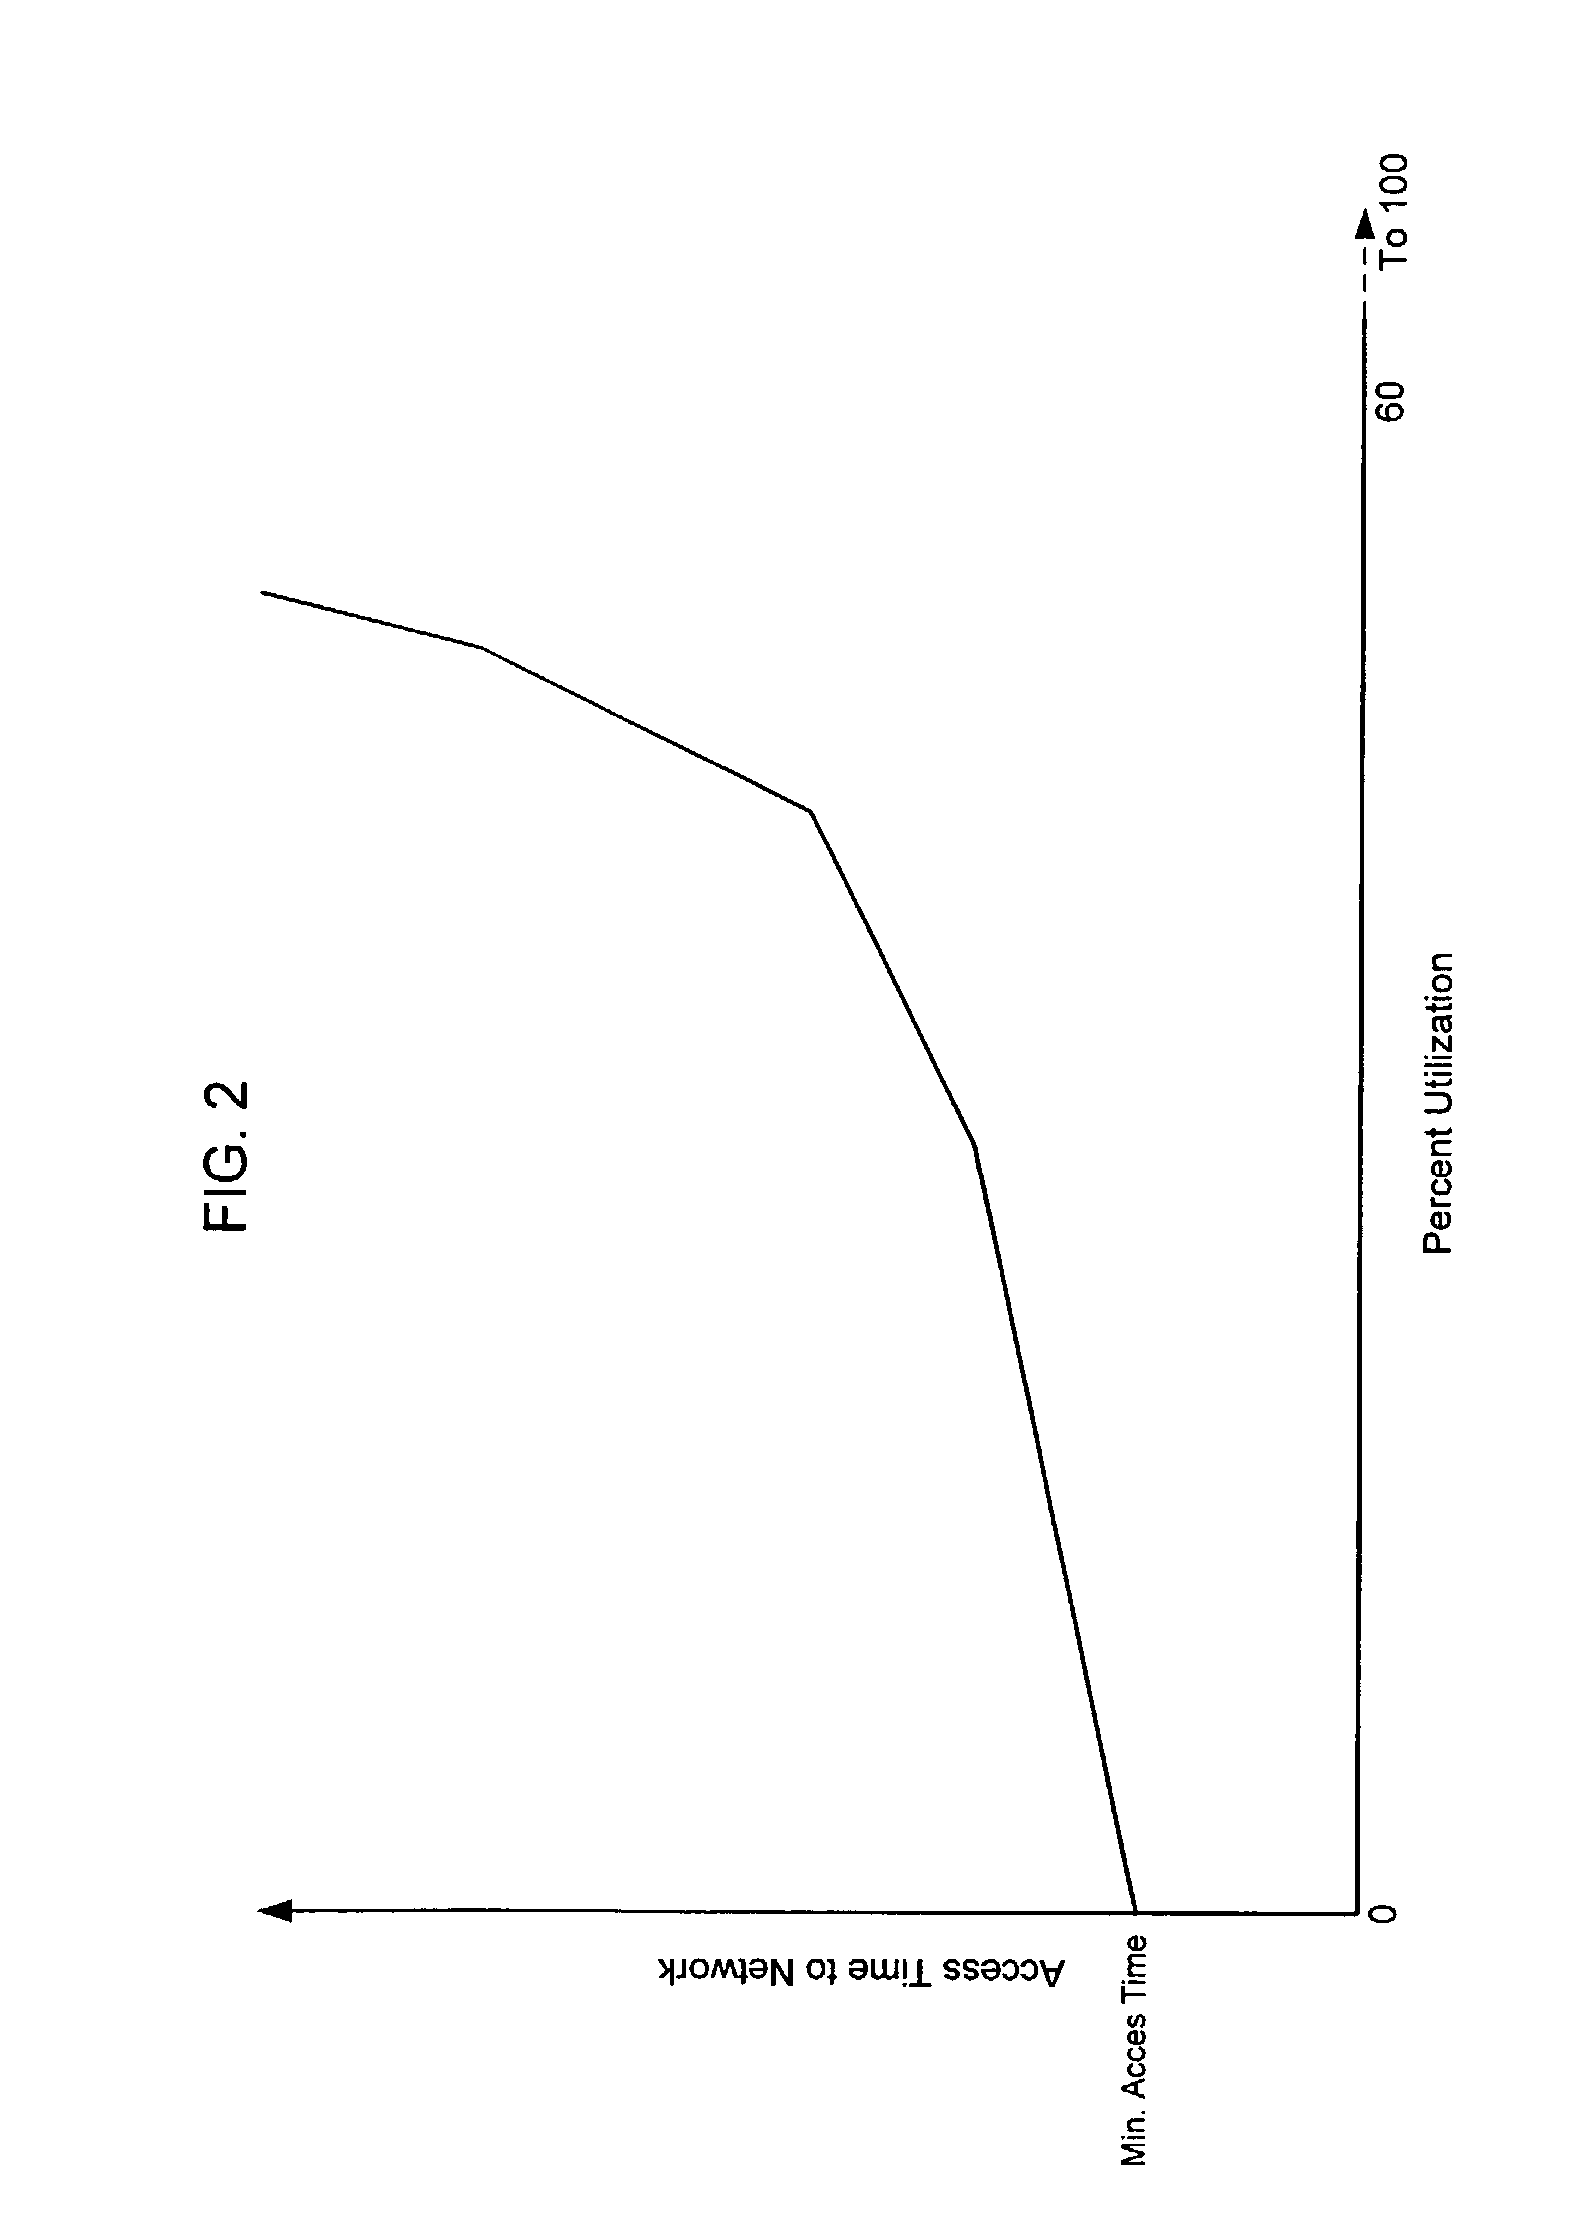 Throughput in multi-rate wireless networks using variable-length packets and other techniques